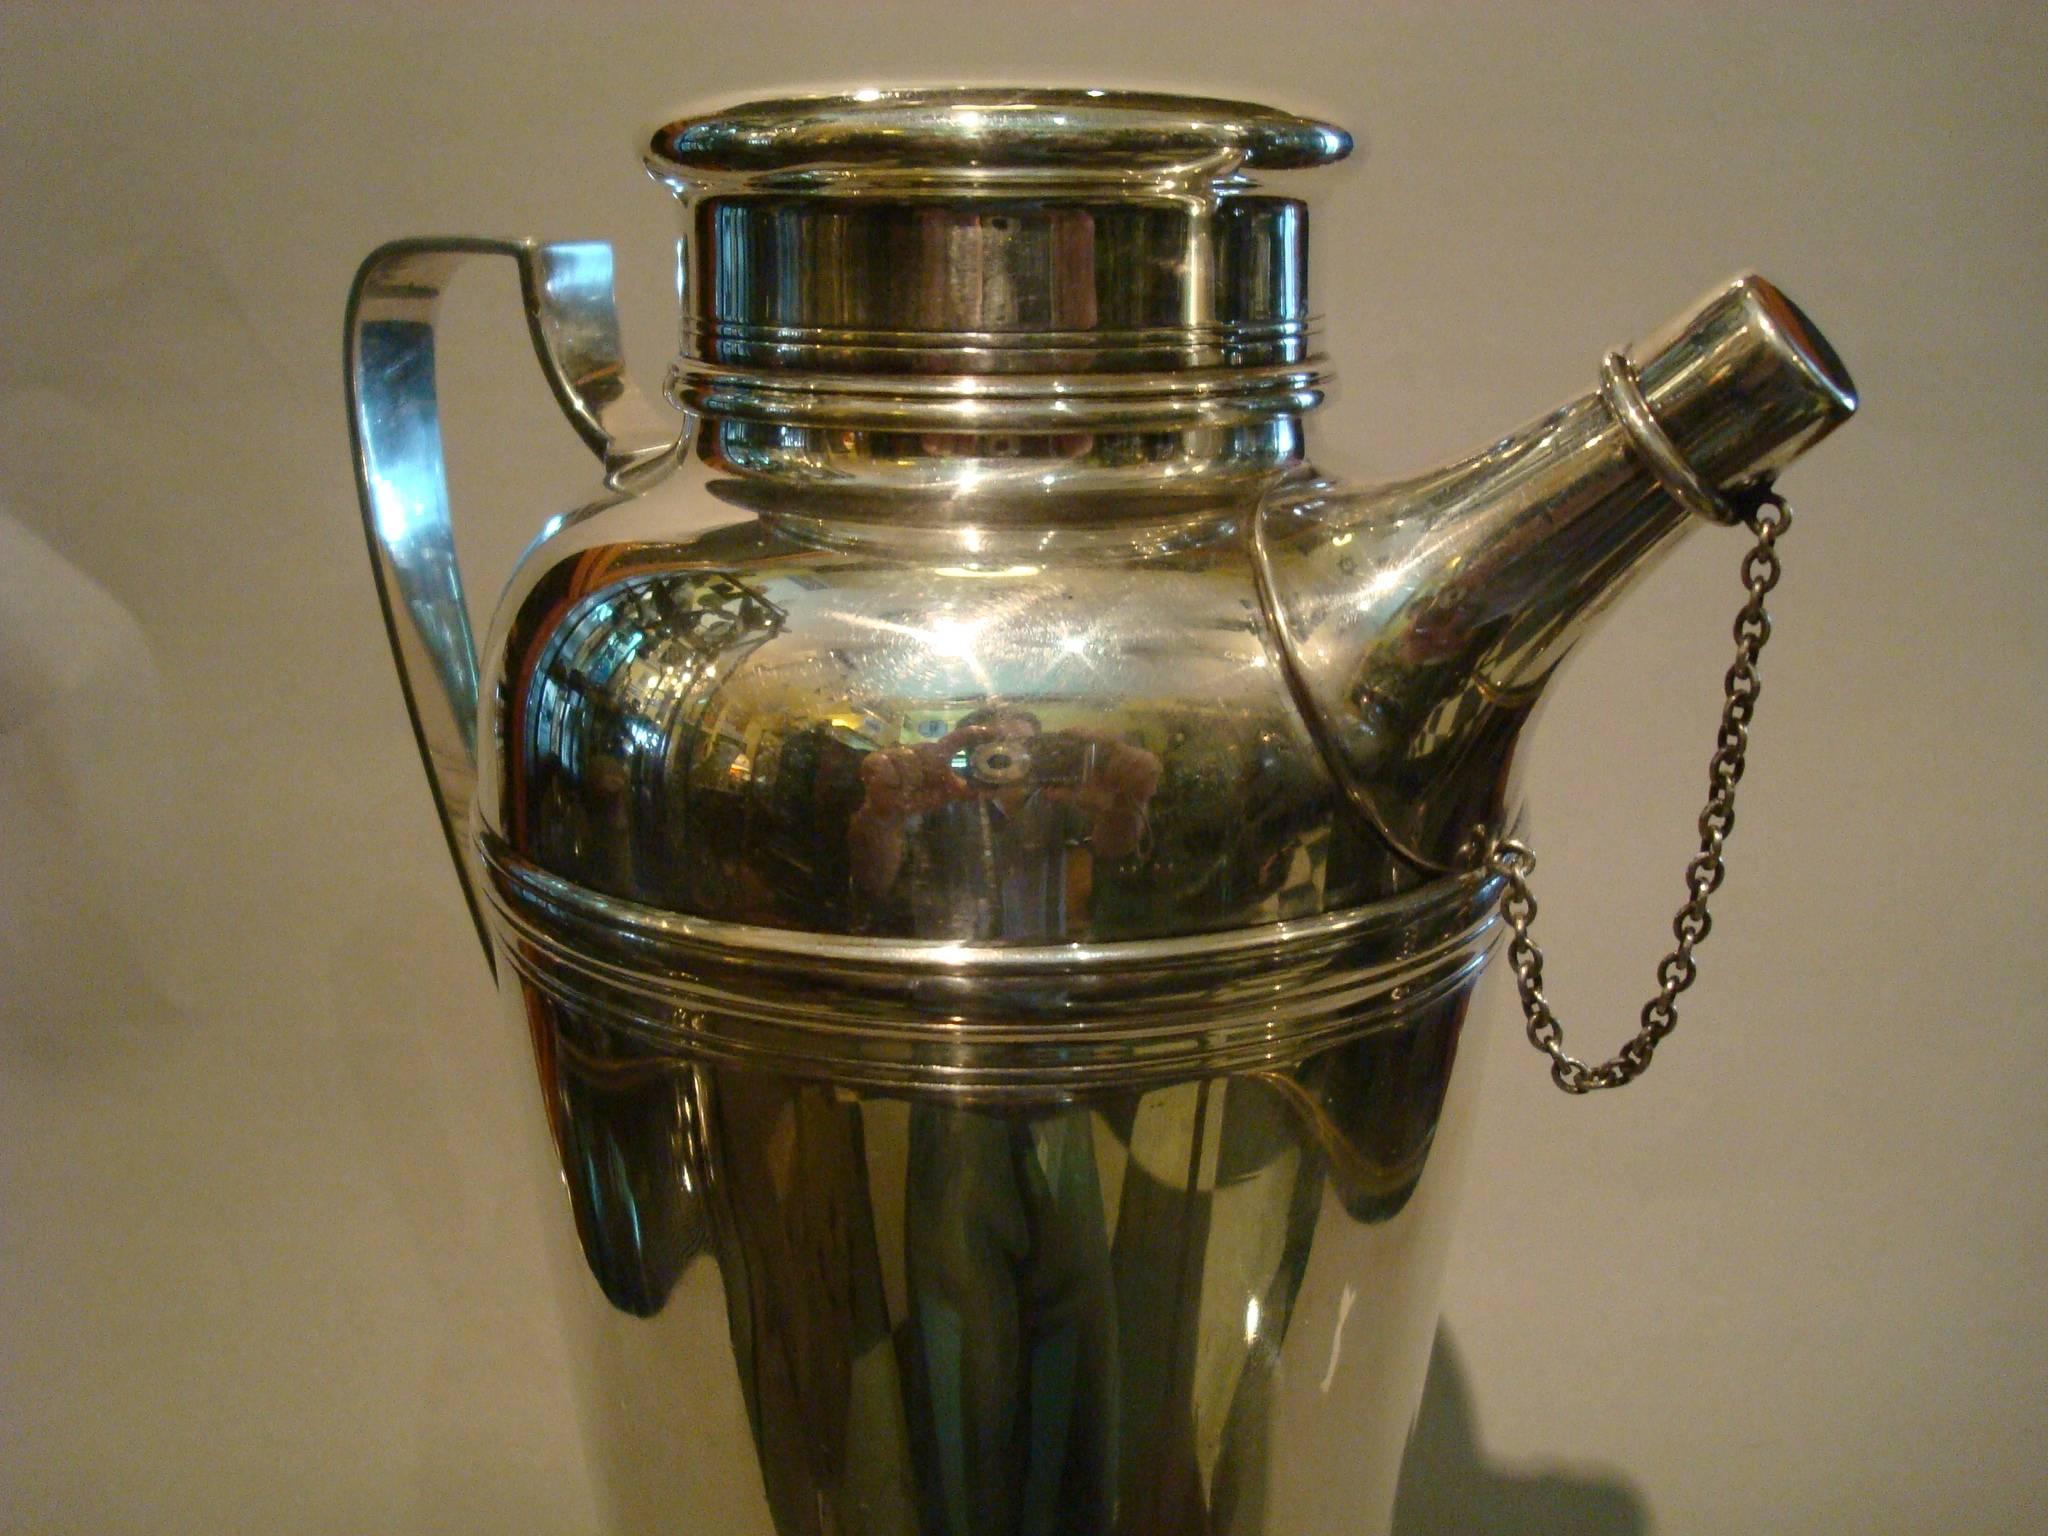 Tiffany Art Deco sterling silver cocktail shaker, circa 1920, Tiffany & Co, New York. The plain tapering body with ribbed upper section and cover, half shield handle, the spout with silver stopper and chain attached. Perfect for any barware